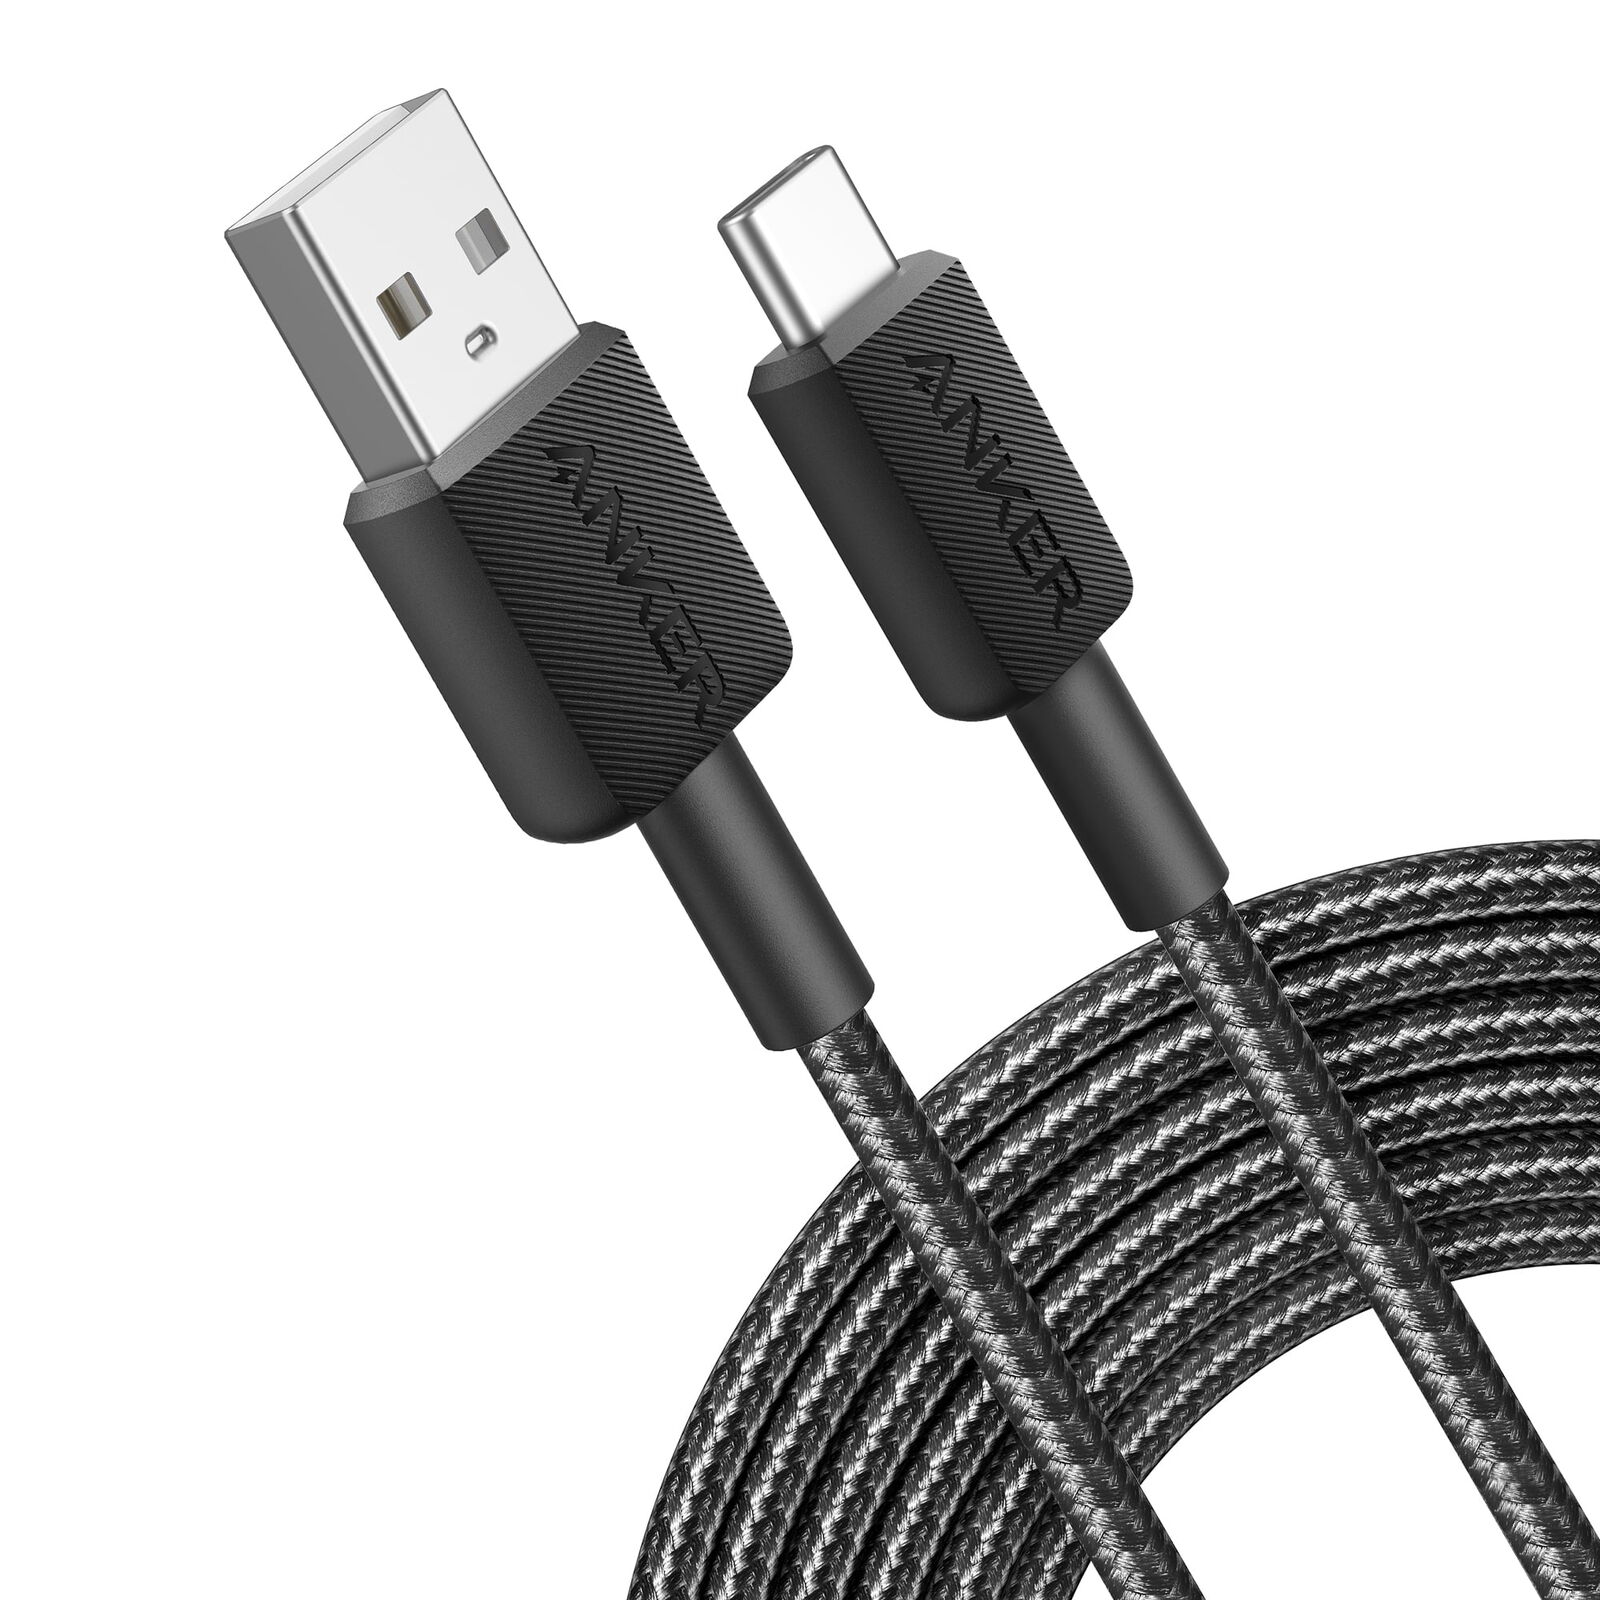 Anker 322 USB-A to USB-C Cable - 10ft Nylon